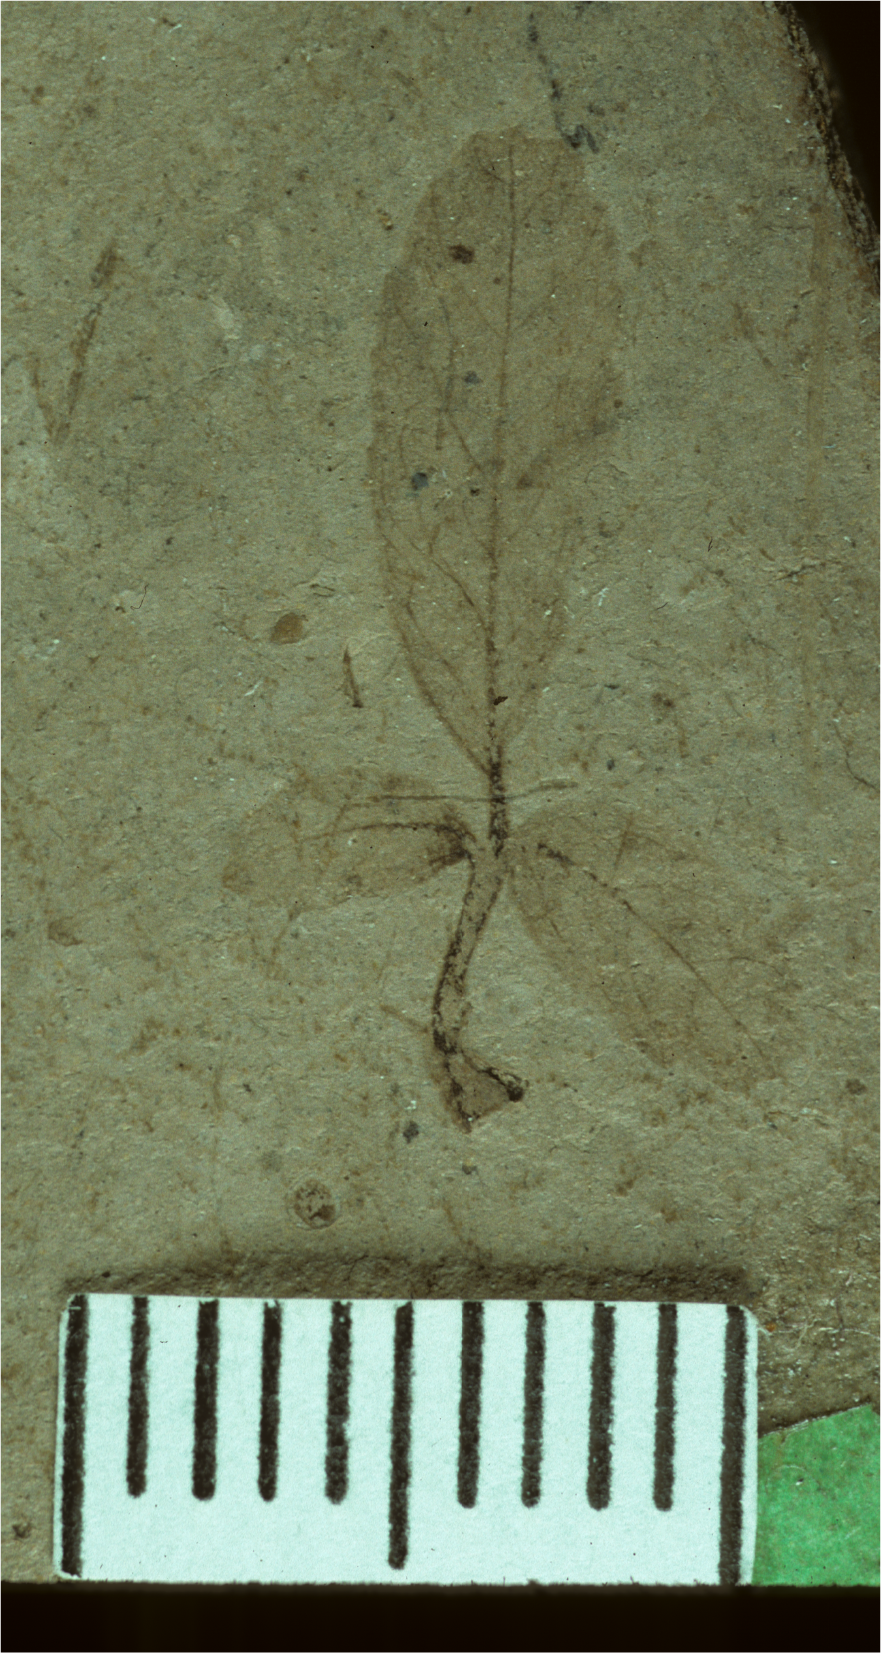 A fossil rose leaf on grey shale with three leaflets.